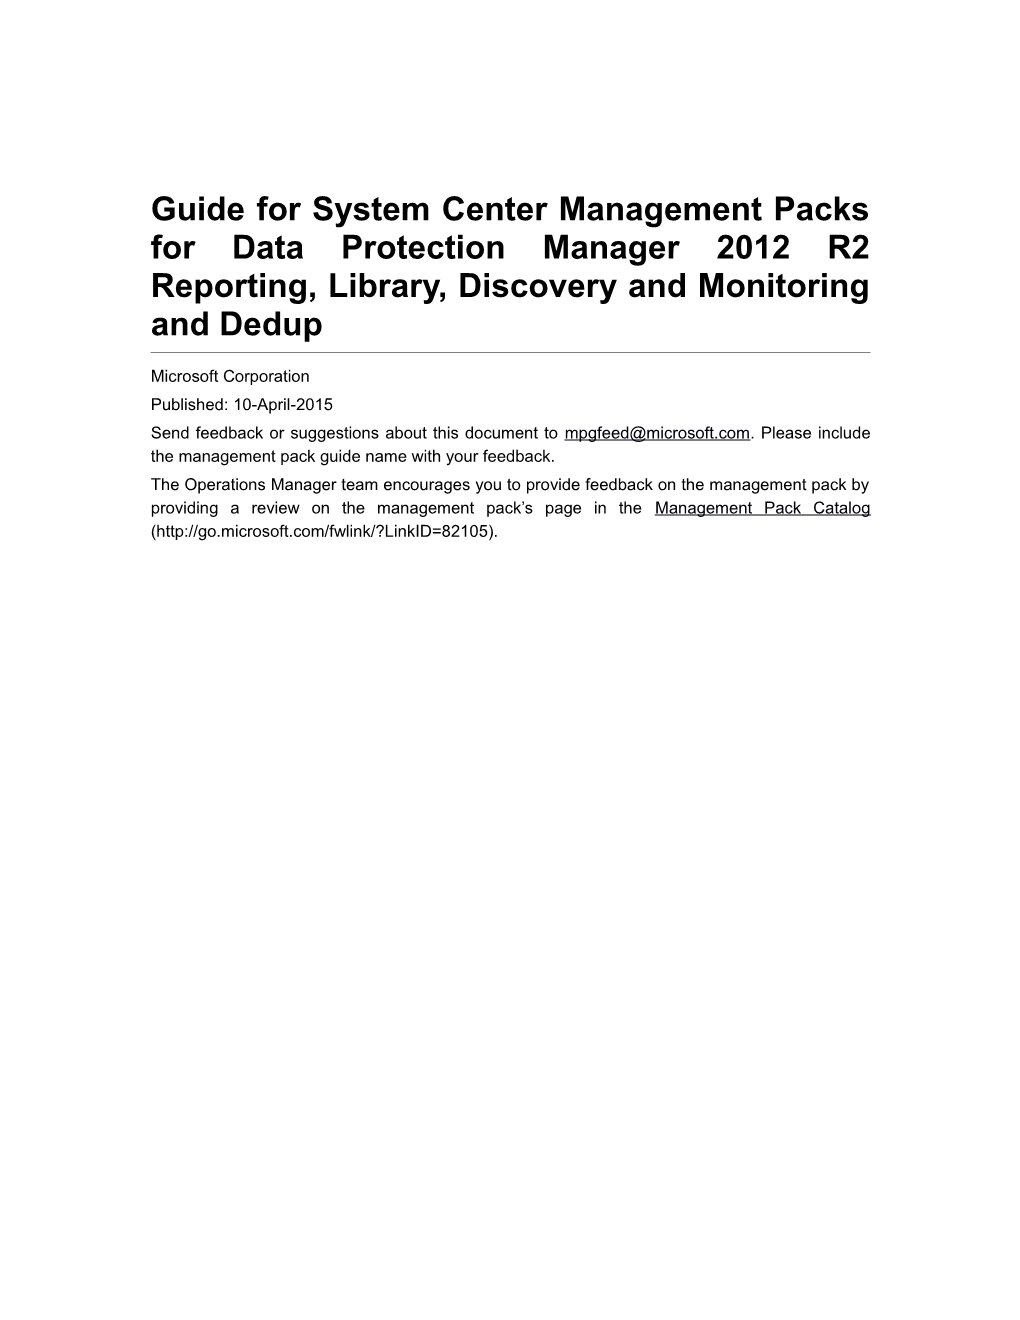 Guide for System Center Management Packs for Data Protection Manager 2012 R2 Reporting